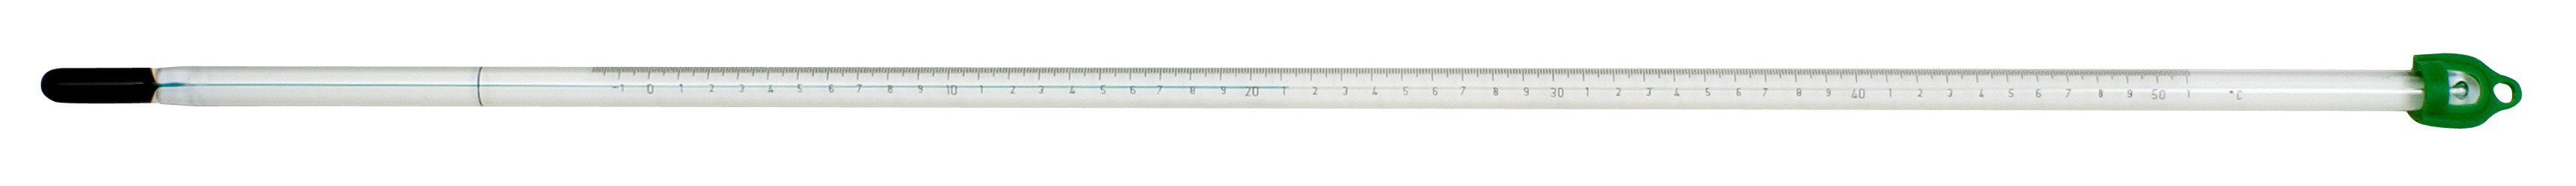 H-B Enviro-Safe Precision Liquid-In-Glass Thermometer; -1 to 61C, 76mm Immersion, Environmentally Friendly